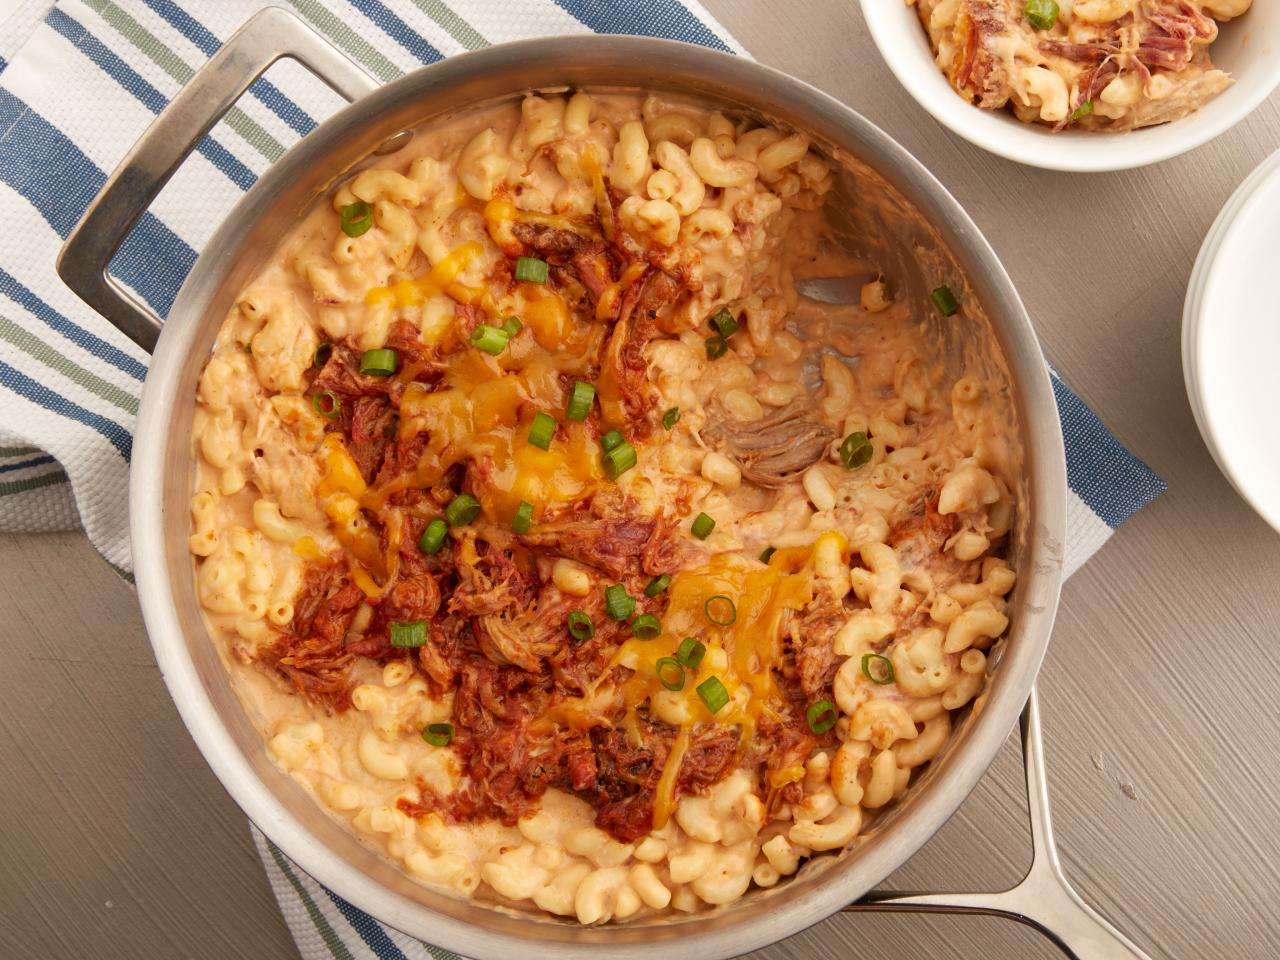 https://food.fnr.sndimg.com/content/dam/images/food/fullset/2018/4/1/0/LS-Library_One-Pot-Pulled-Pork-Mac-And-Cheese_s4x3.jpg.rend.hgtvcom.1280.960.suffix/1522646441587.jpeg